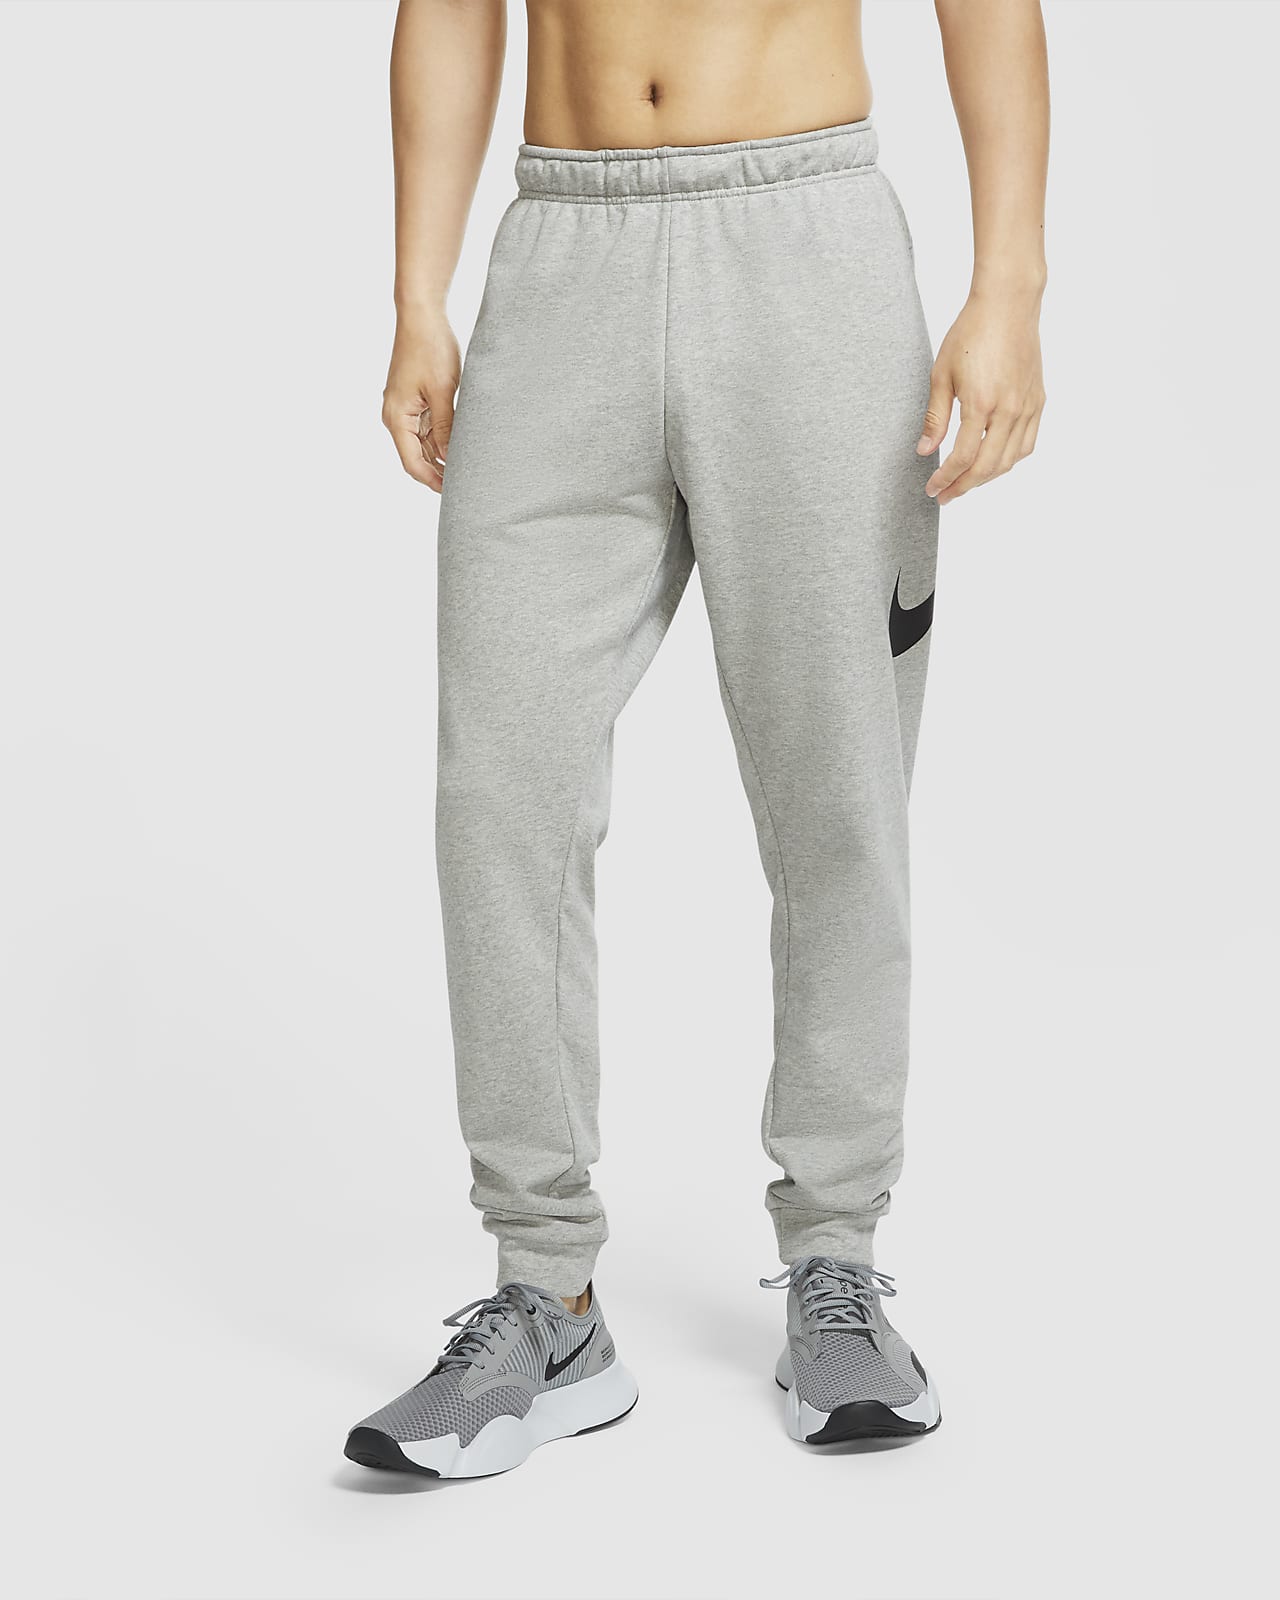 Nike standard fit mid rise full length dry fit training pant size